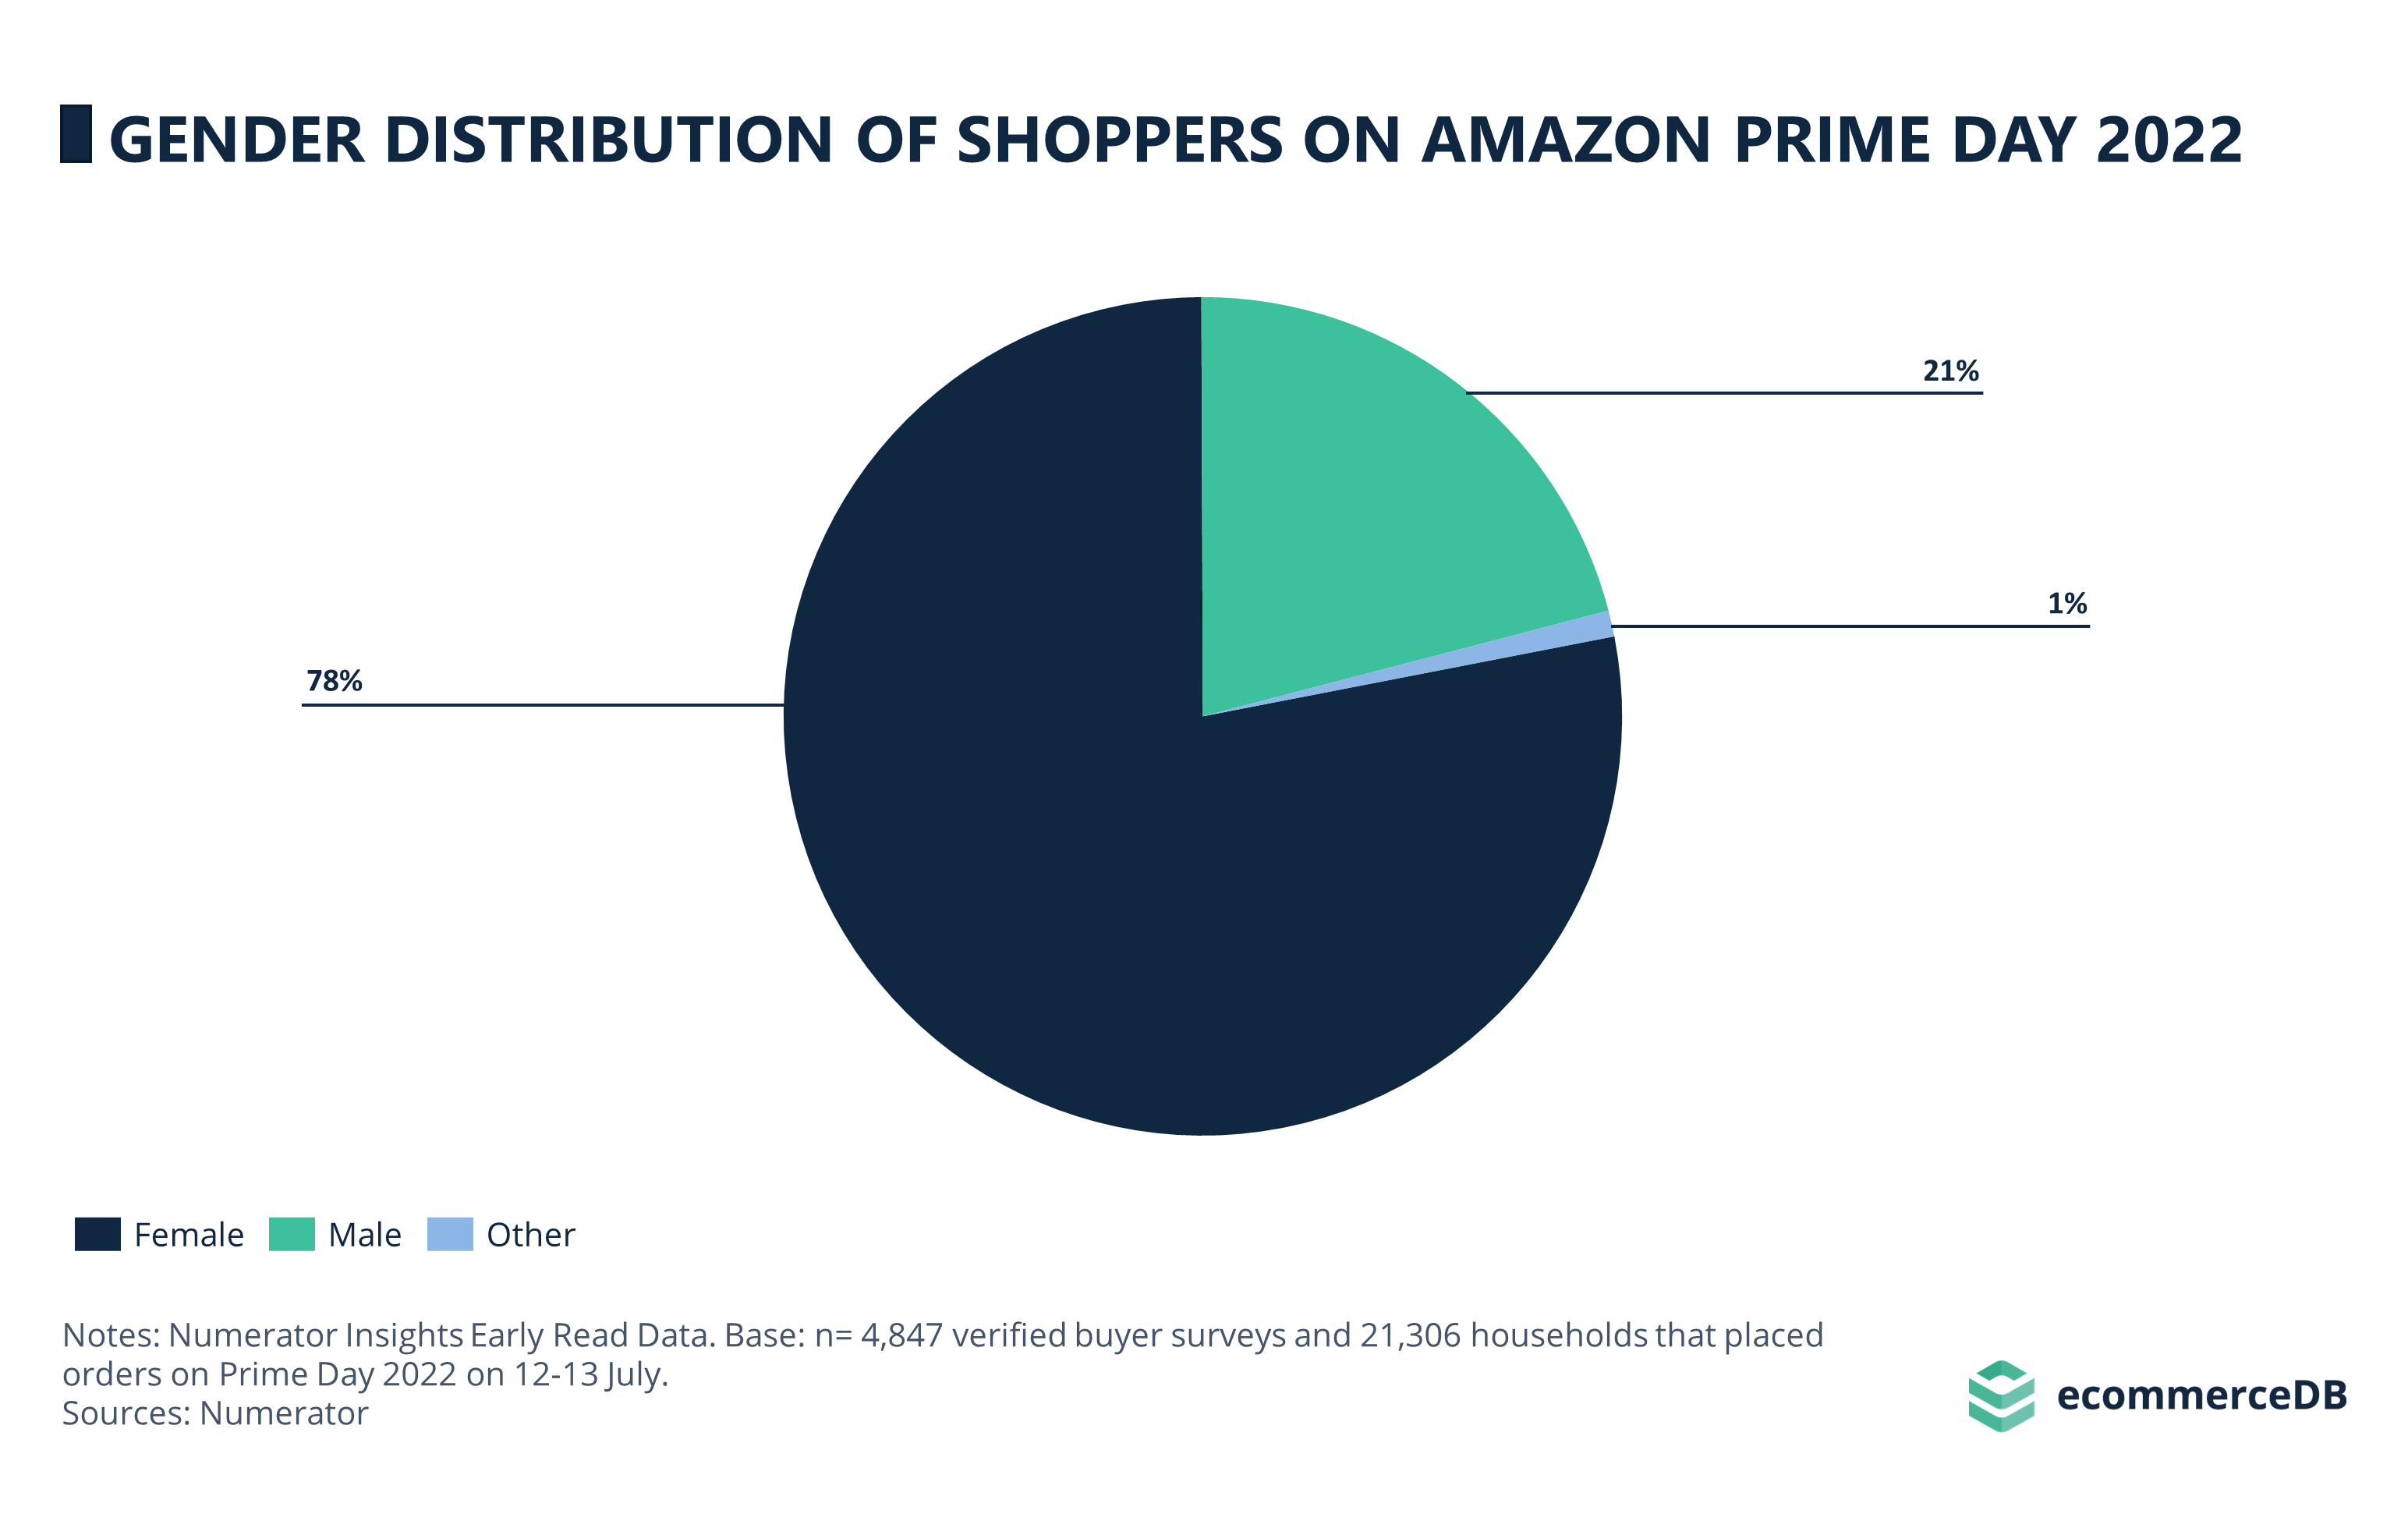 Gender Distribution of Shoppers on Prime Day 2022